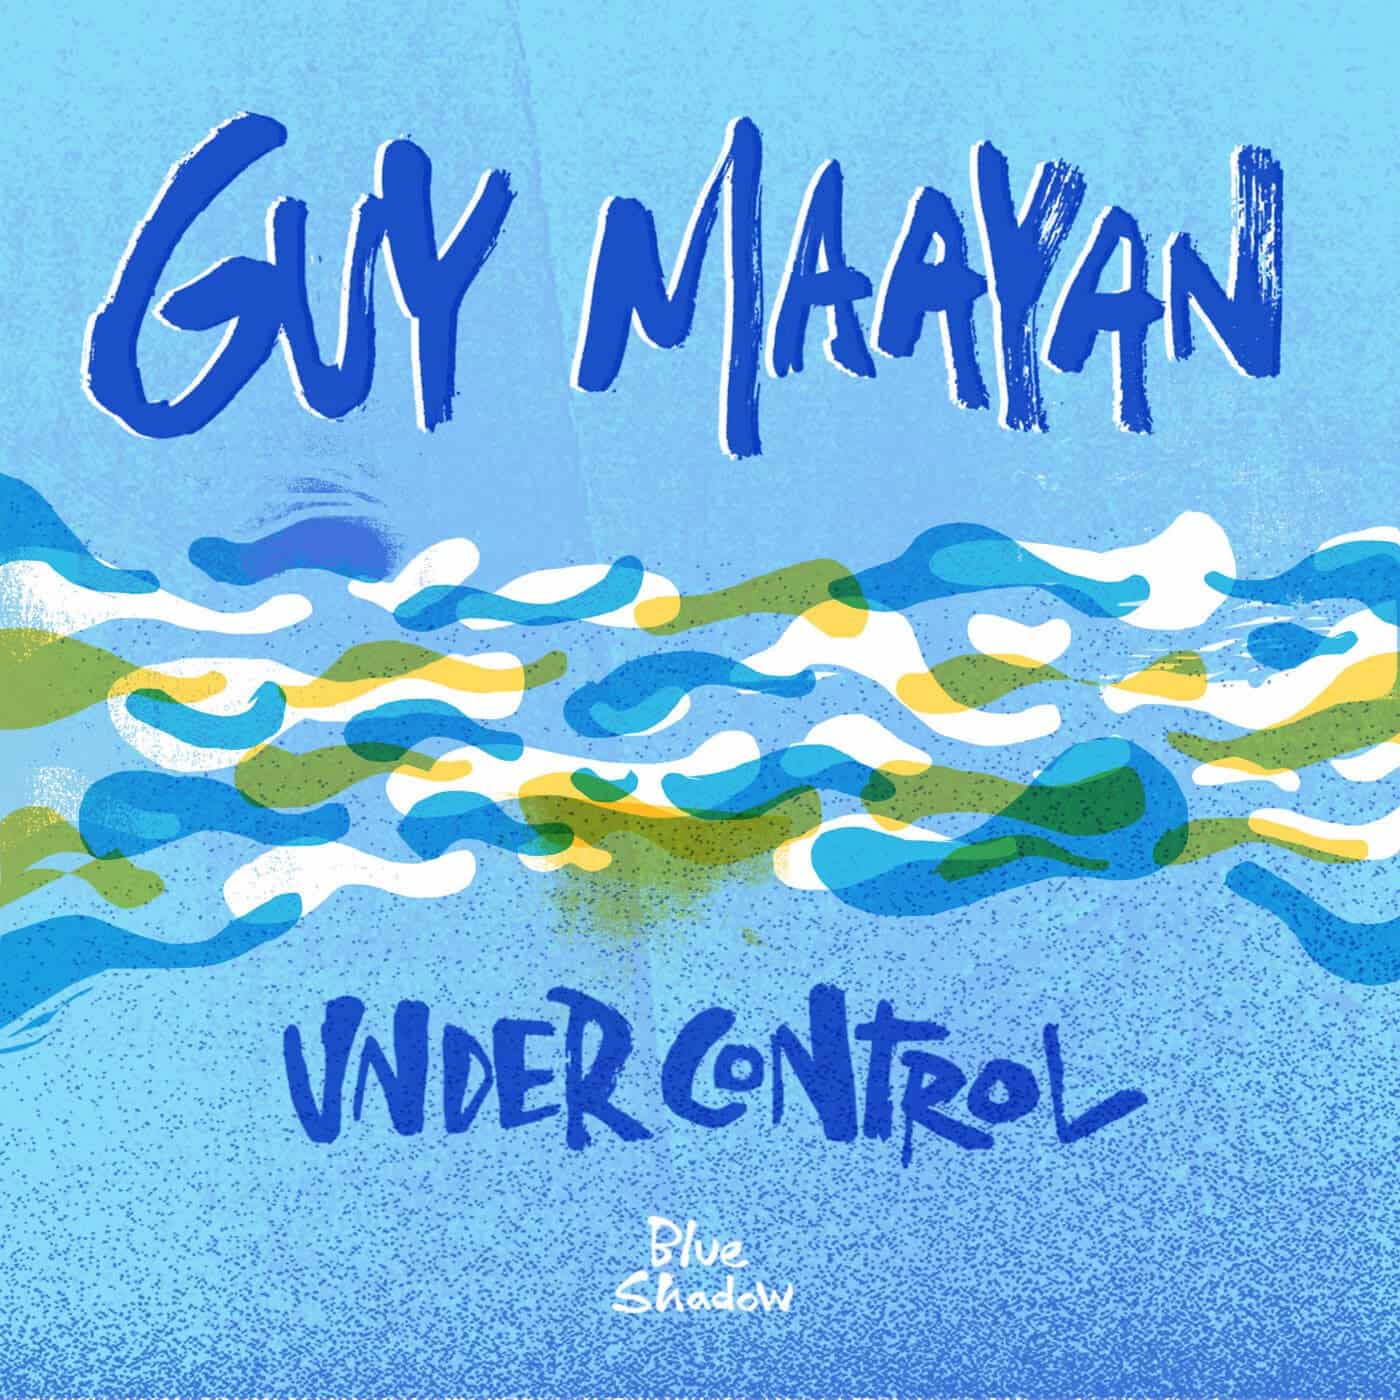 image cover: Guy Maayan - Under Control / BS024